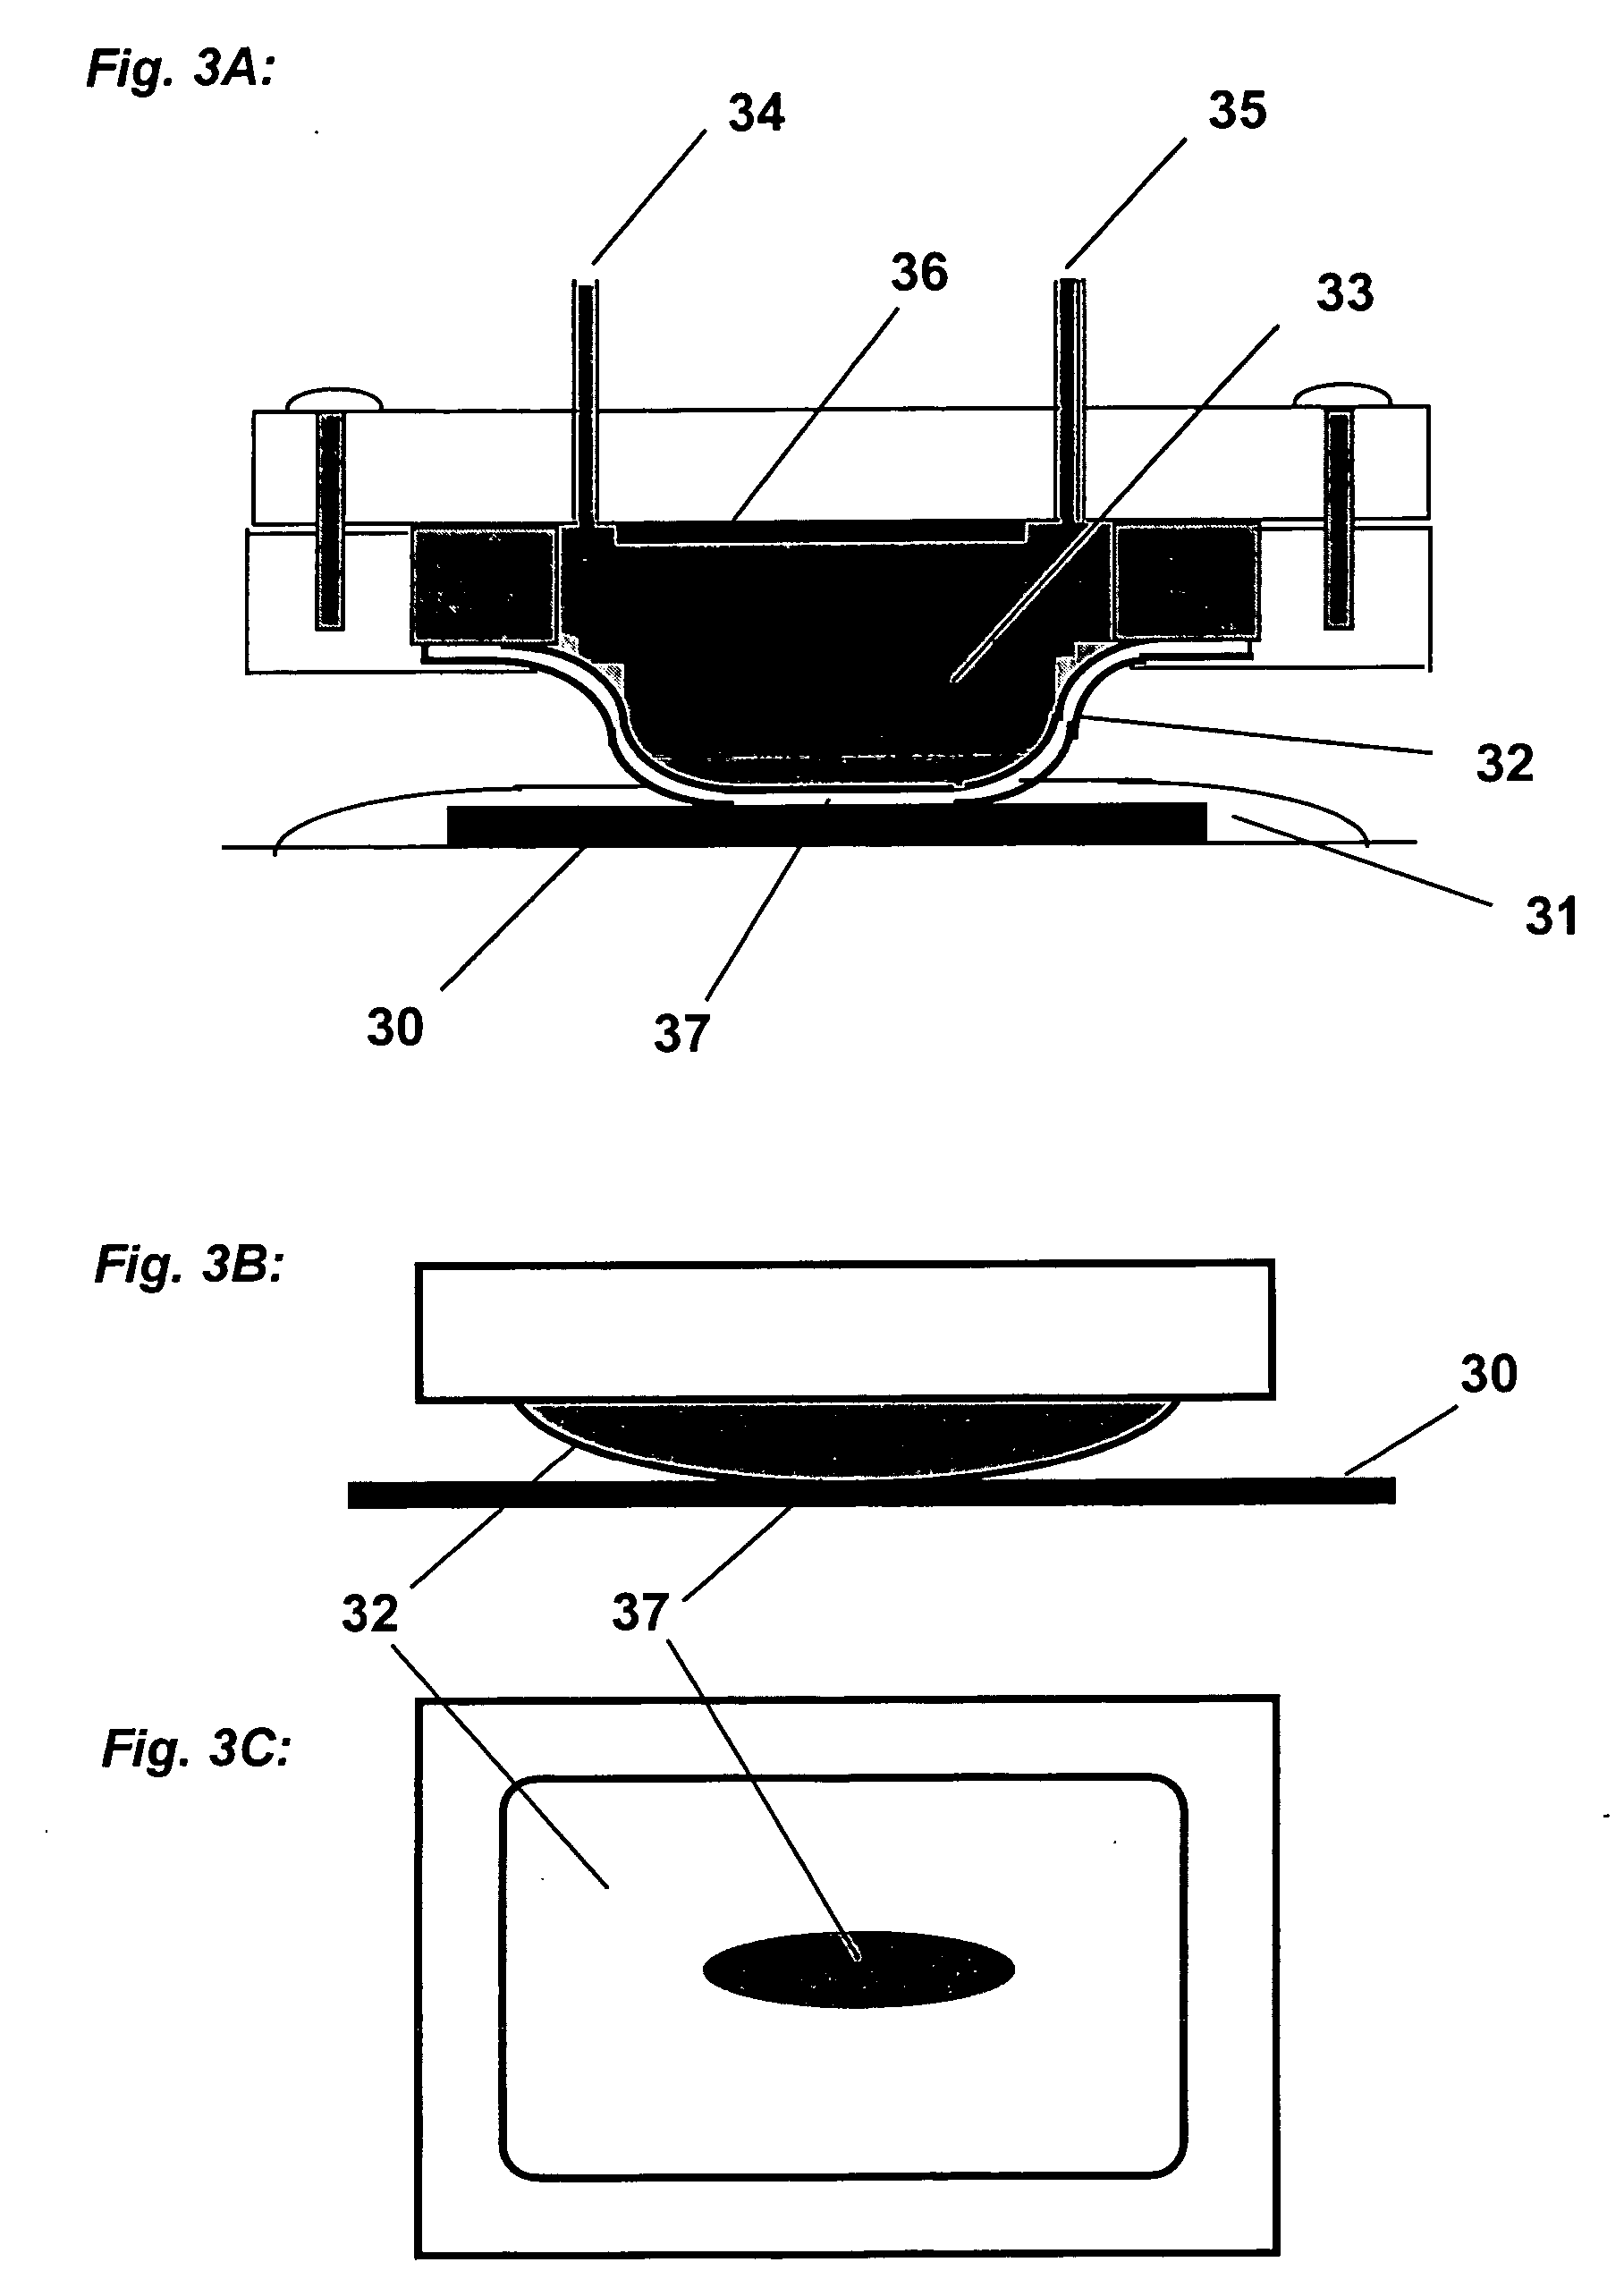 Apparatus adapted for membrane-mediated electropolishing